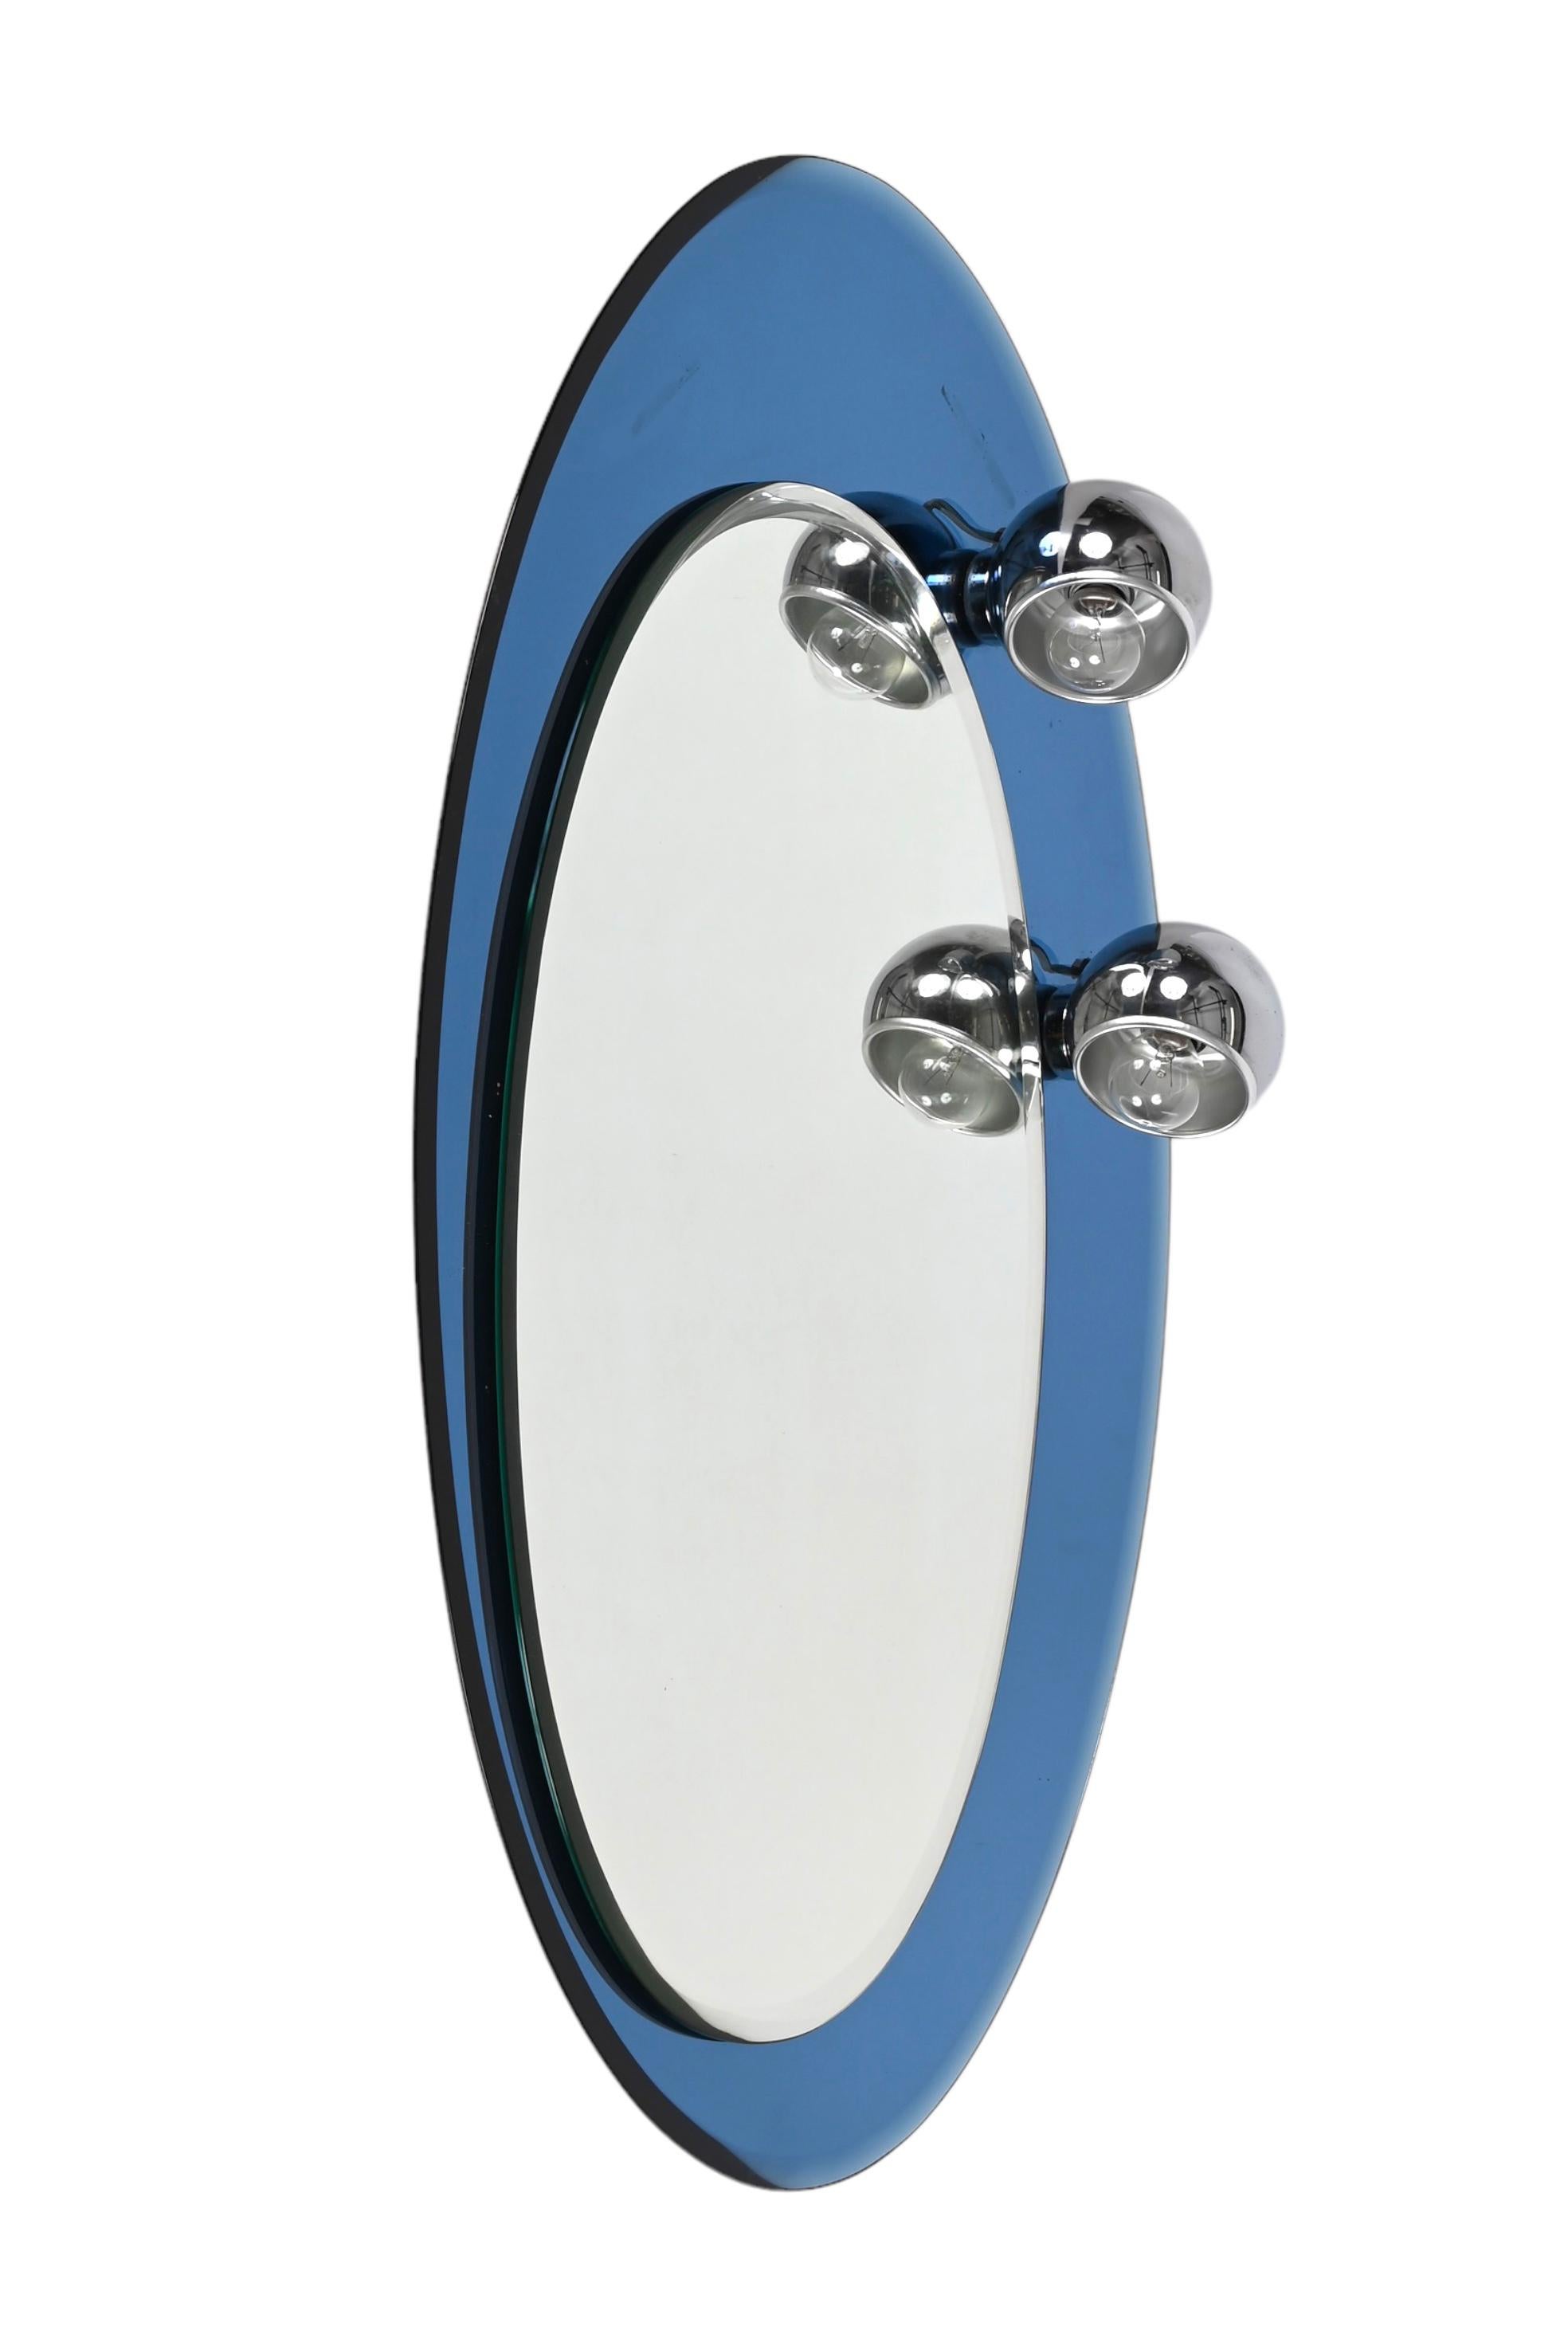 Mid-Century Modern Midcentury Oval Wall Mirror with Blue Glass Frame and Magnetic Lights Italy 1960 For Sale